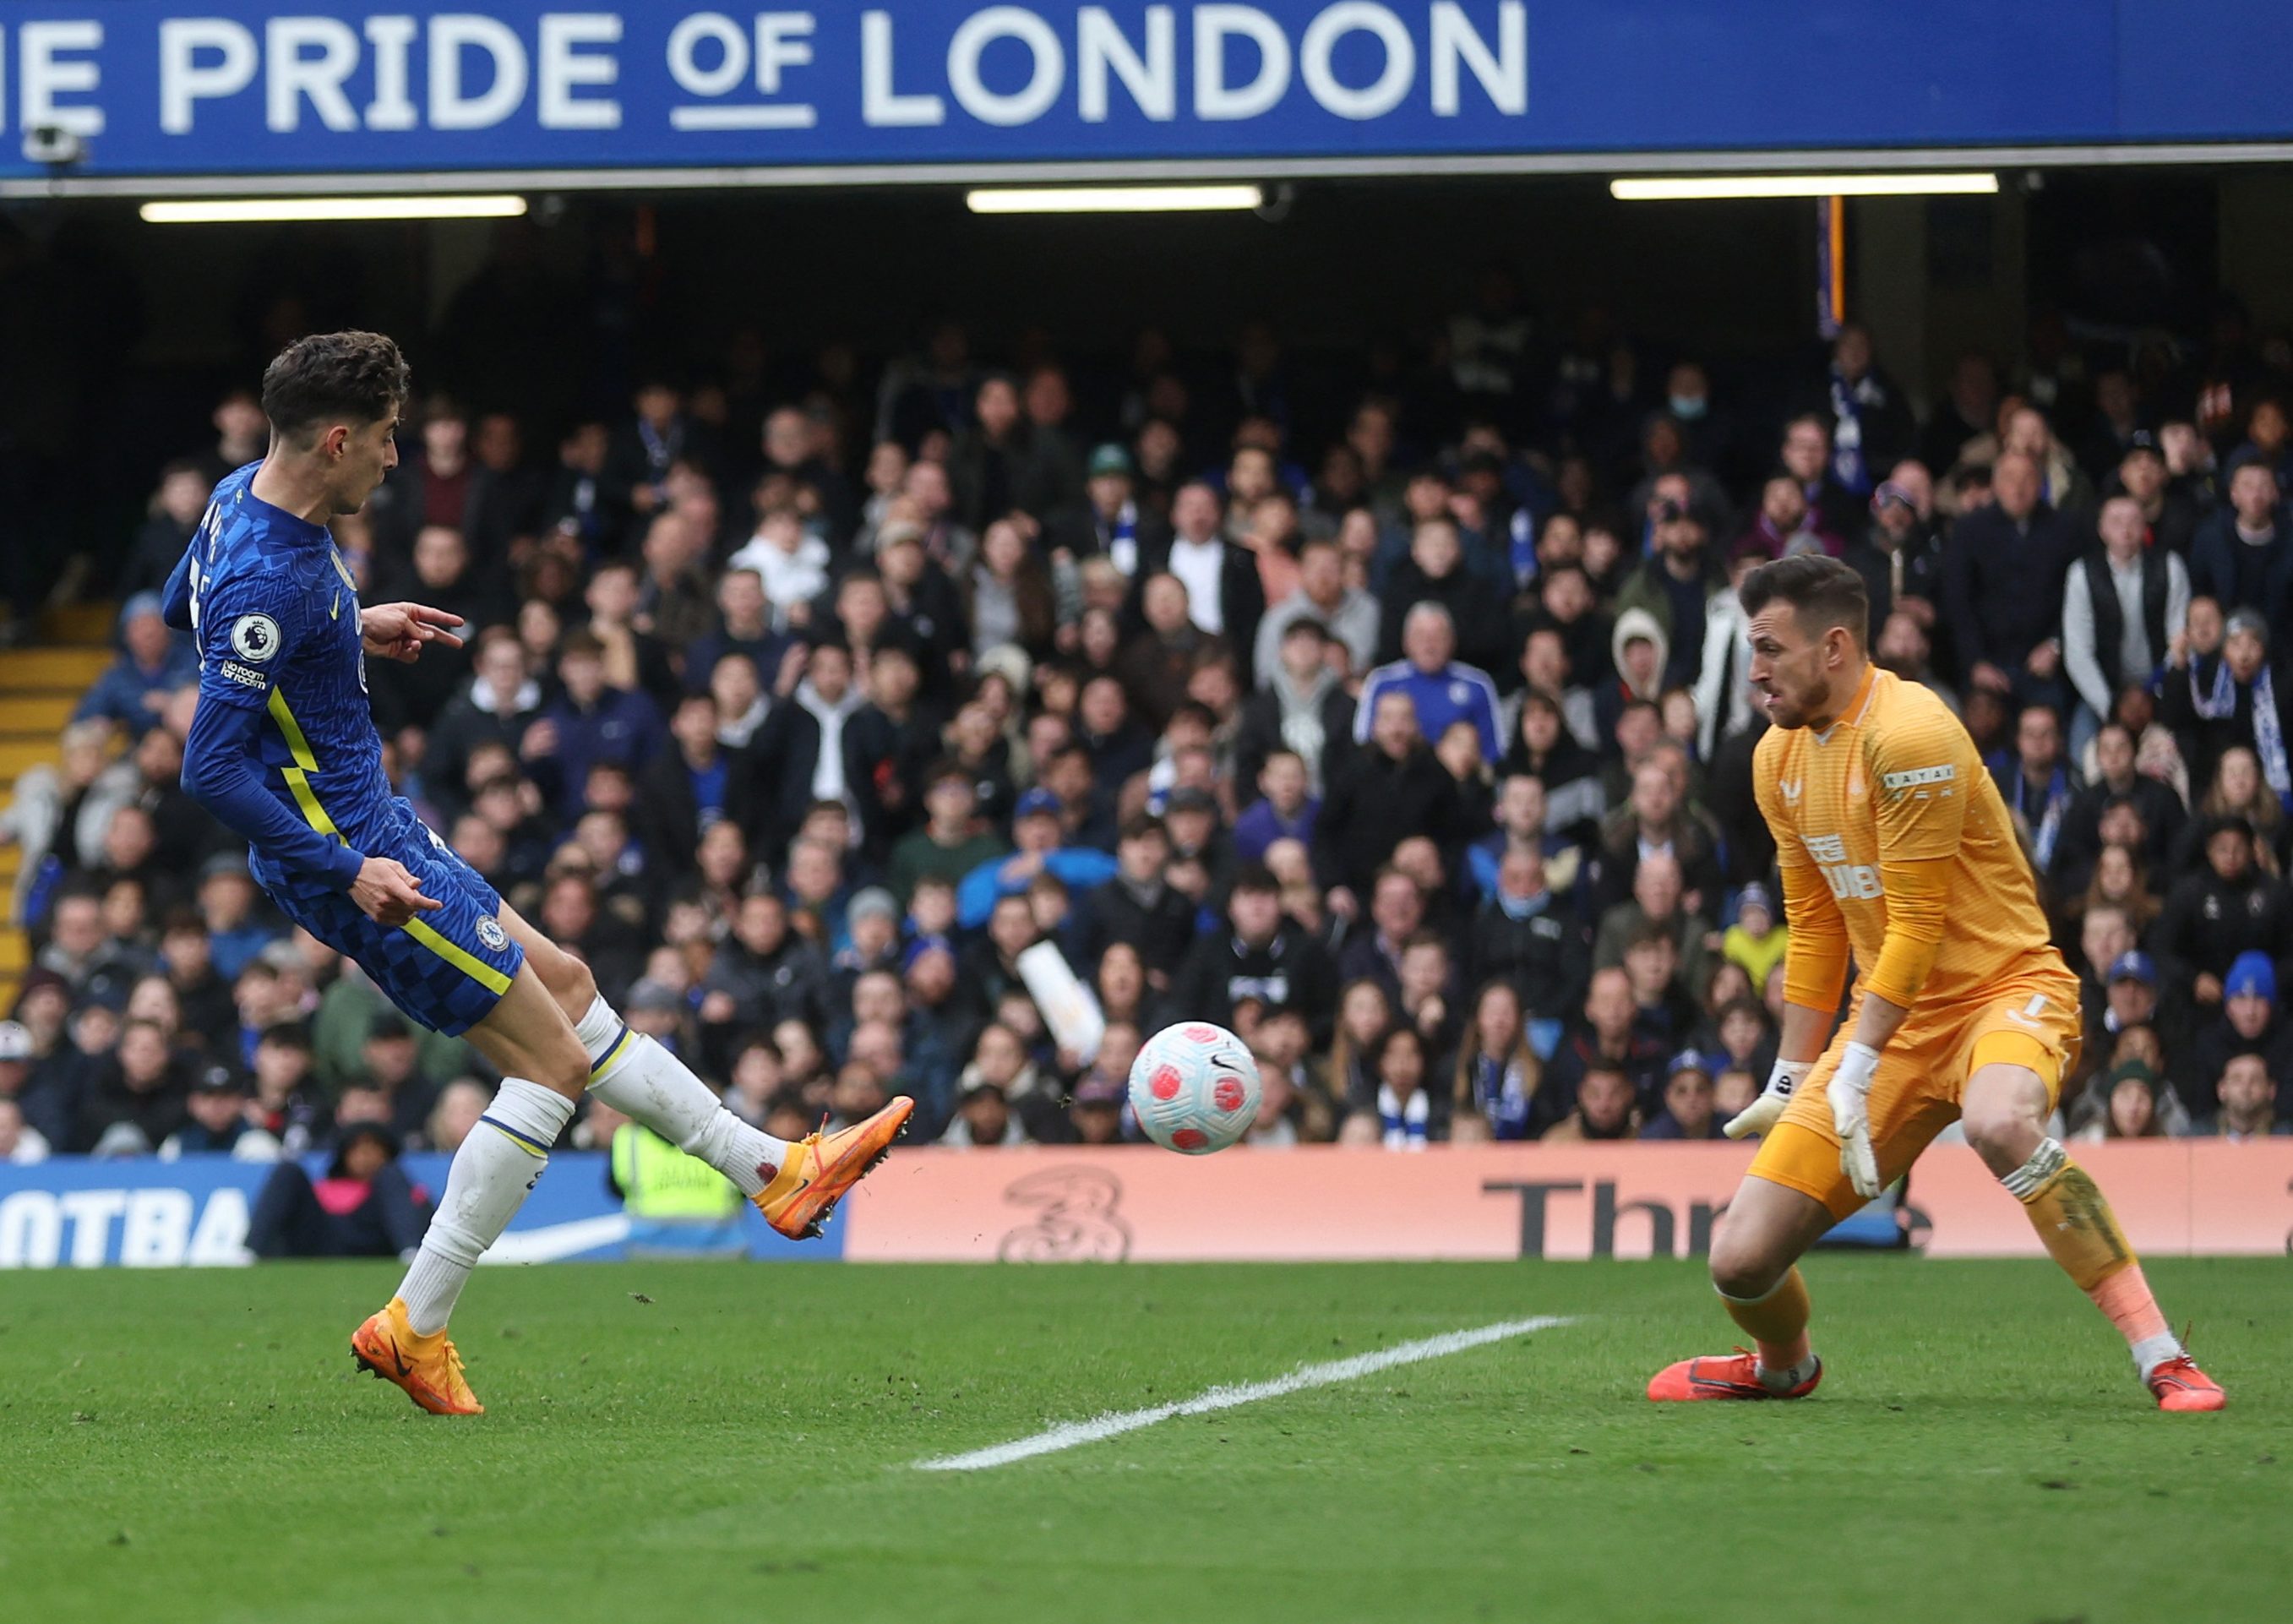 Chelsea 1-0 Newcastle United: Kai Havertz comes up clutch for Chelsea to beat in form Newcastle United as VAR comes under scrutiny once again